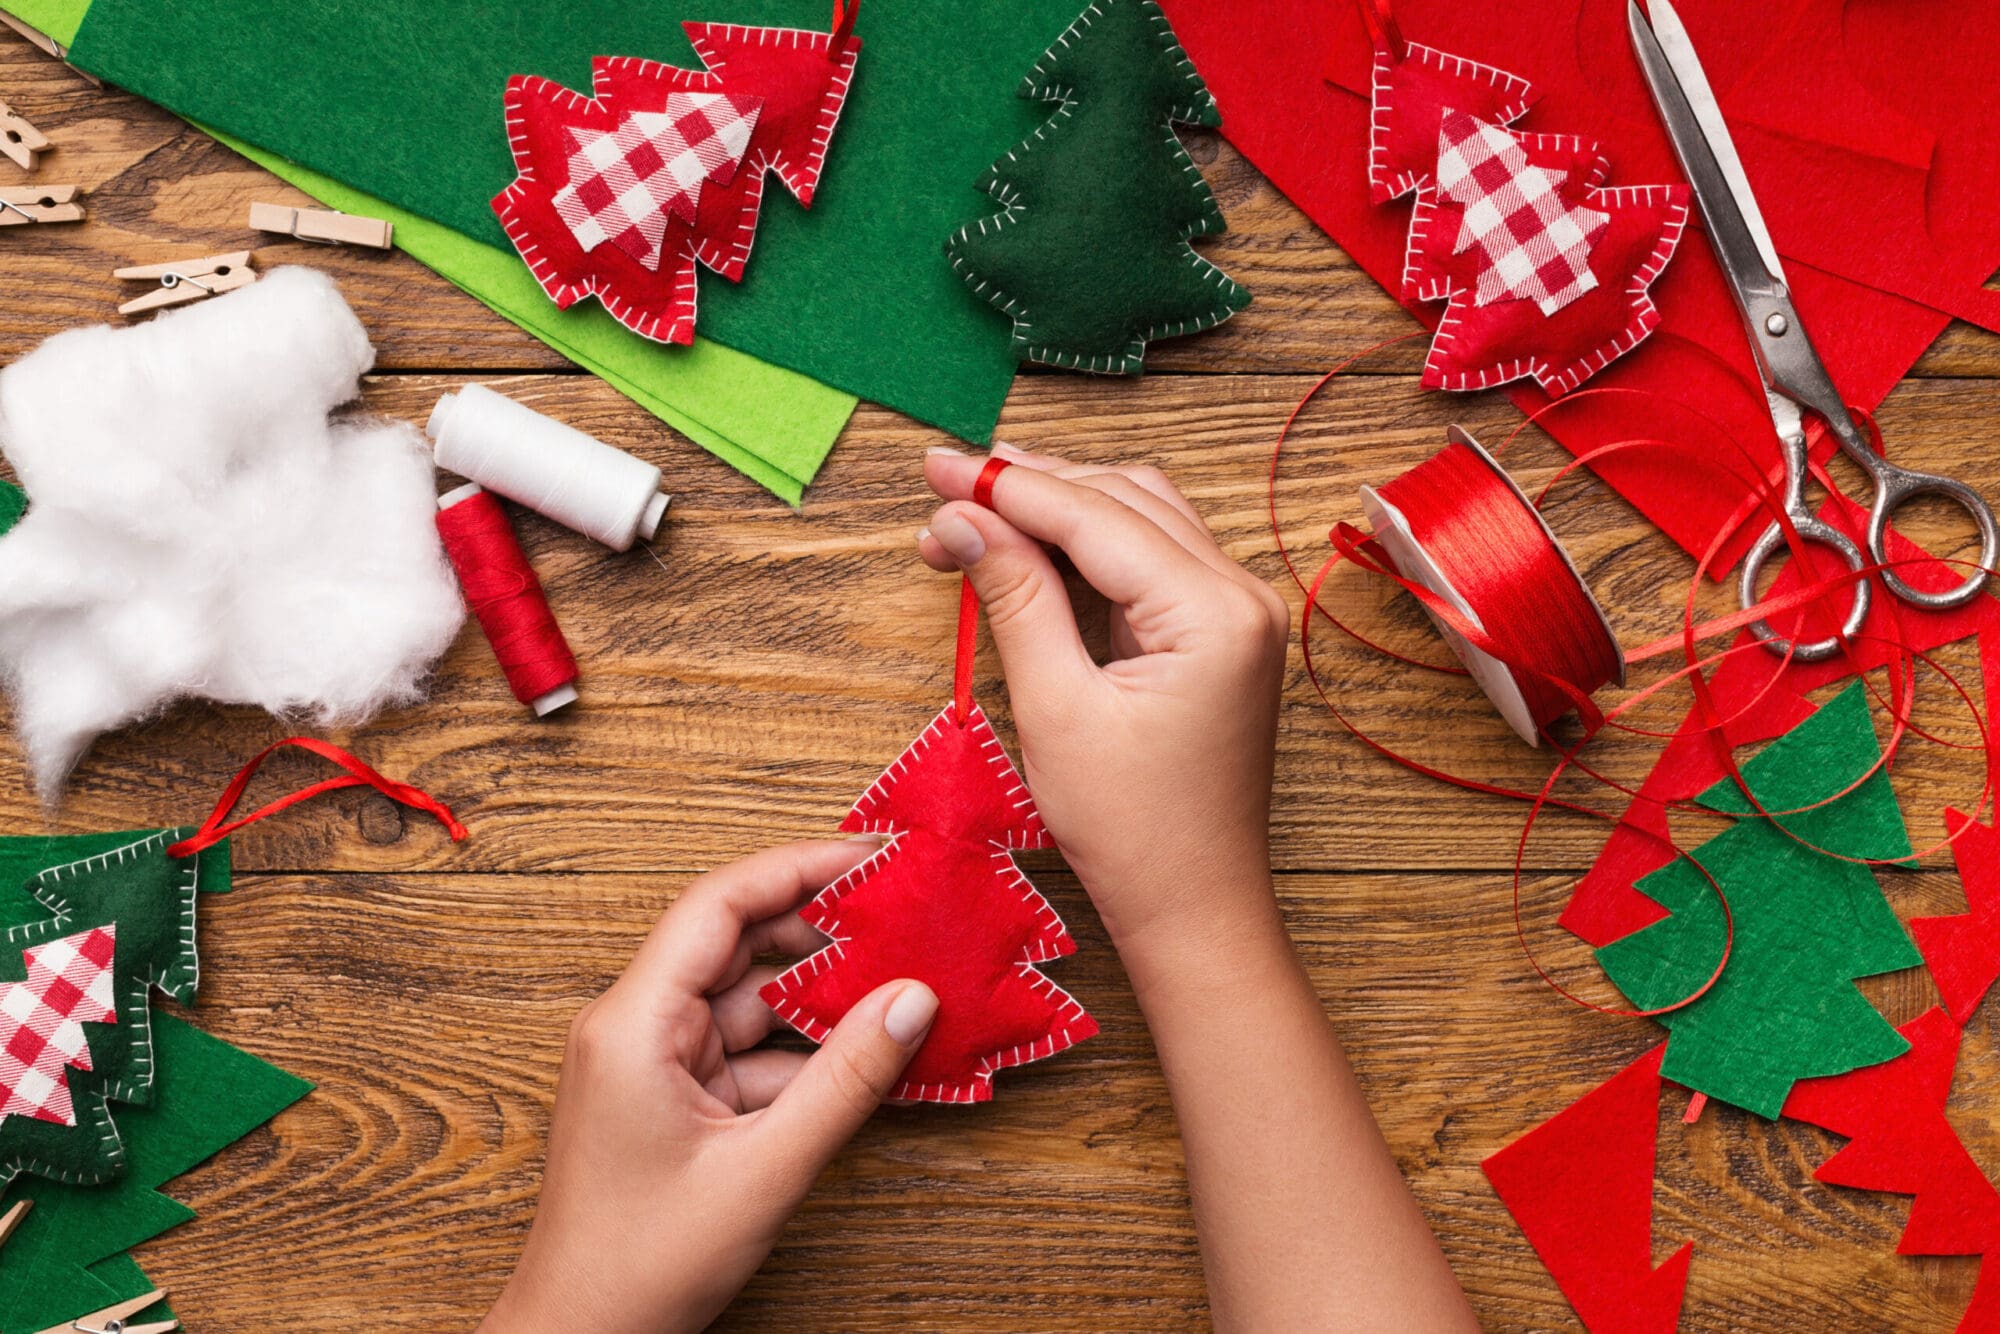 Have a Merry Covid Christmas with these 10 IDEAS: